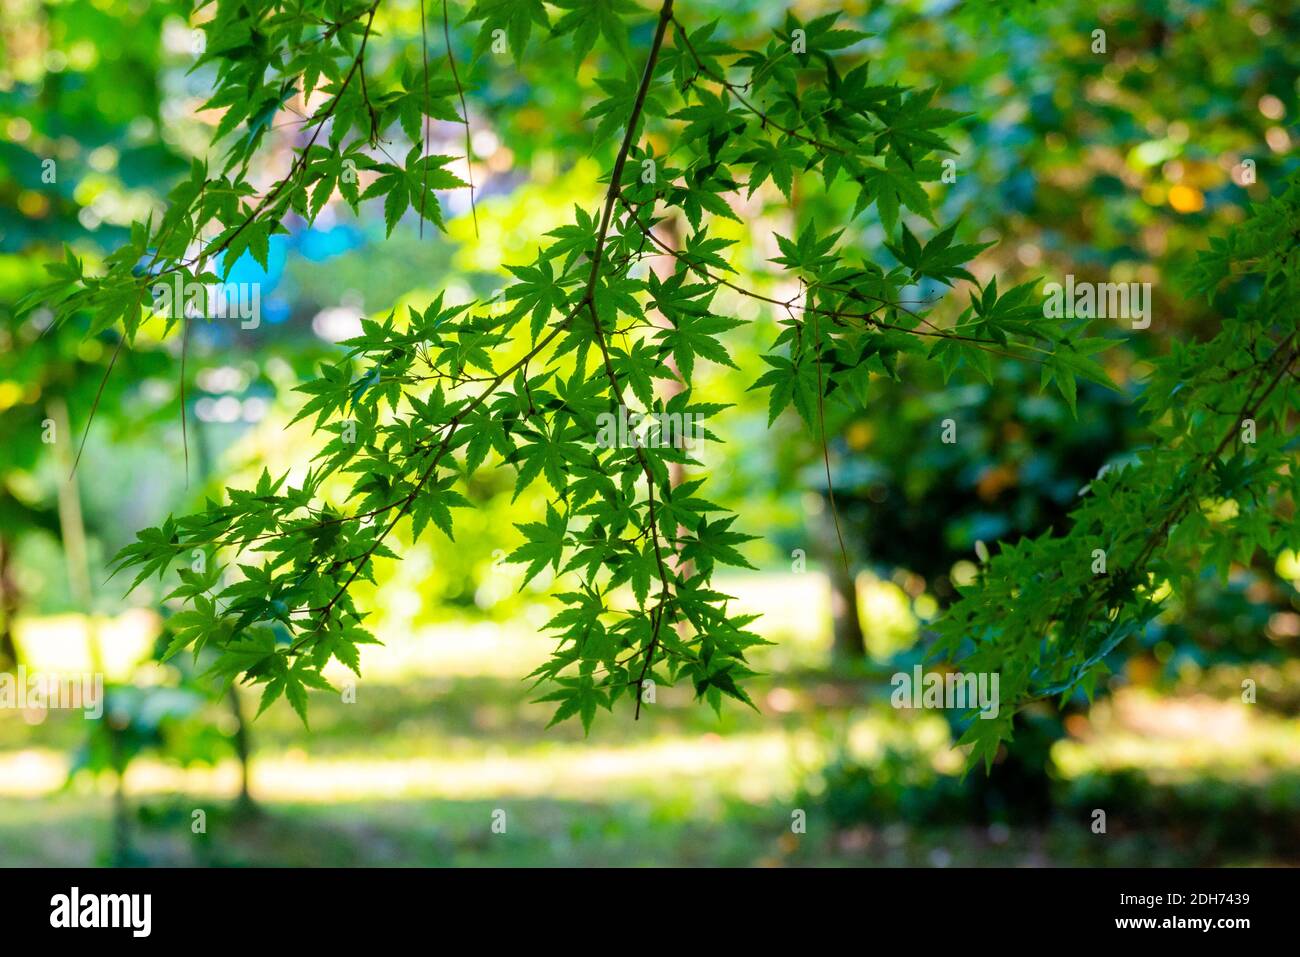 Acer palmatum or palm-shaped maple budding in a park at summer. Stock Photo